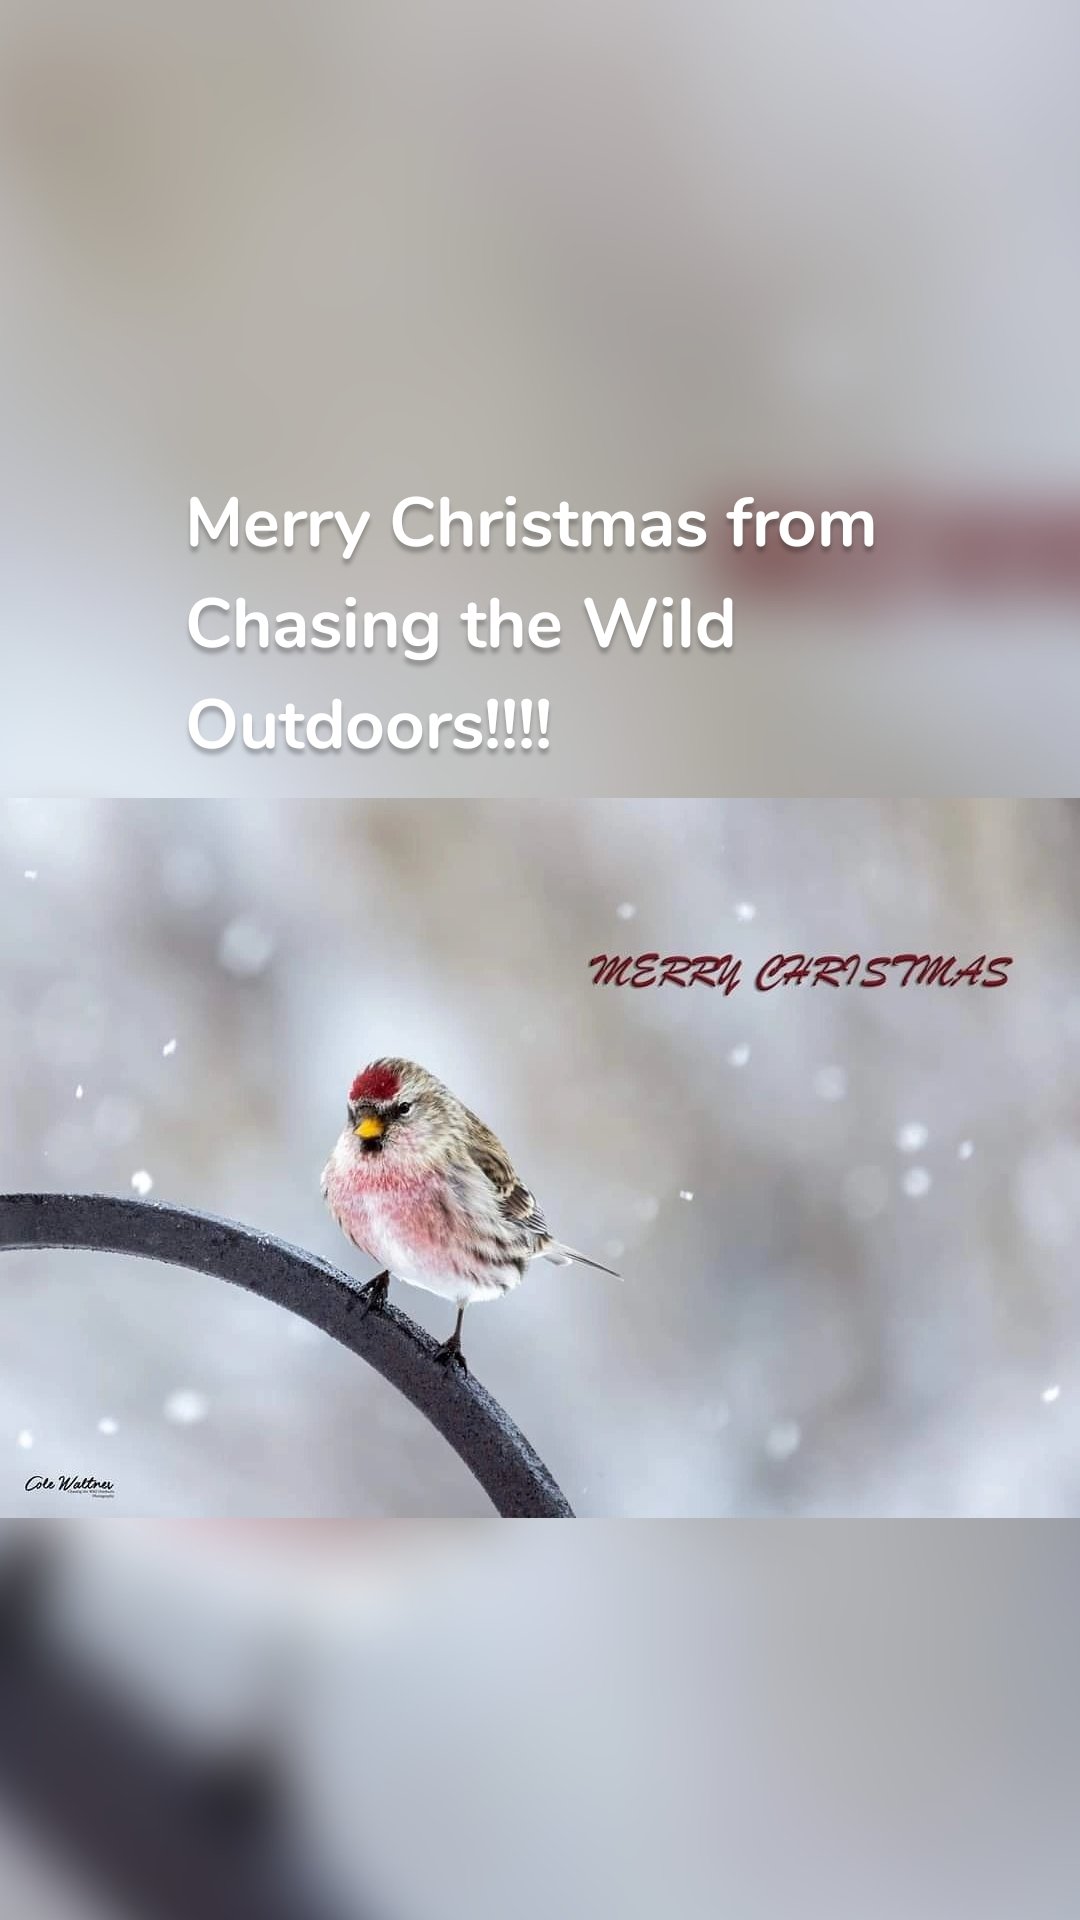 Merry Christmas from Chasing the Wild Outdoors!!!!